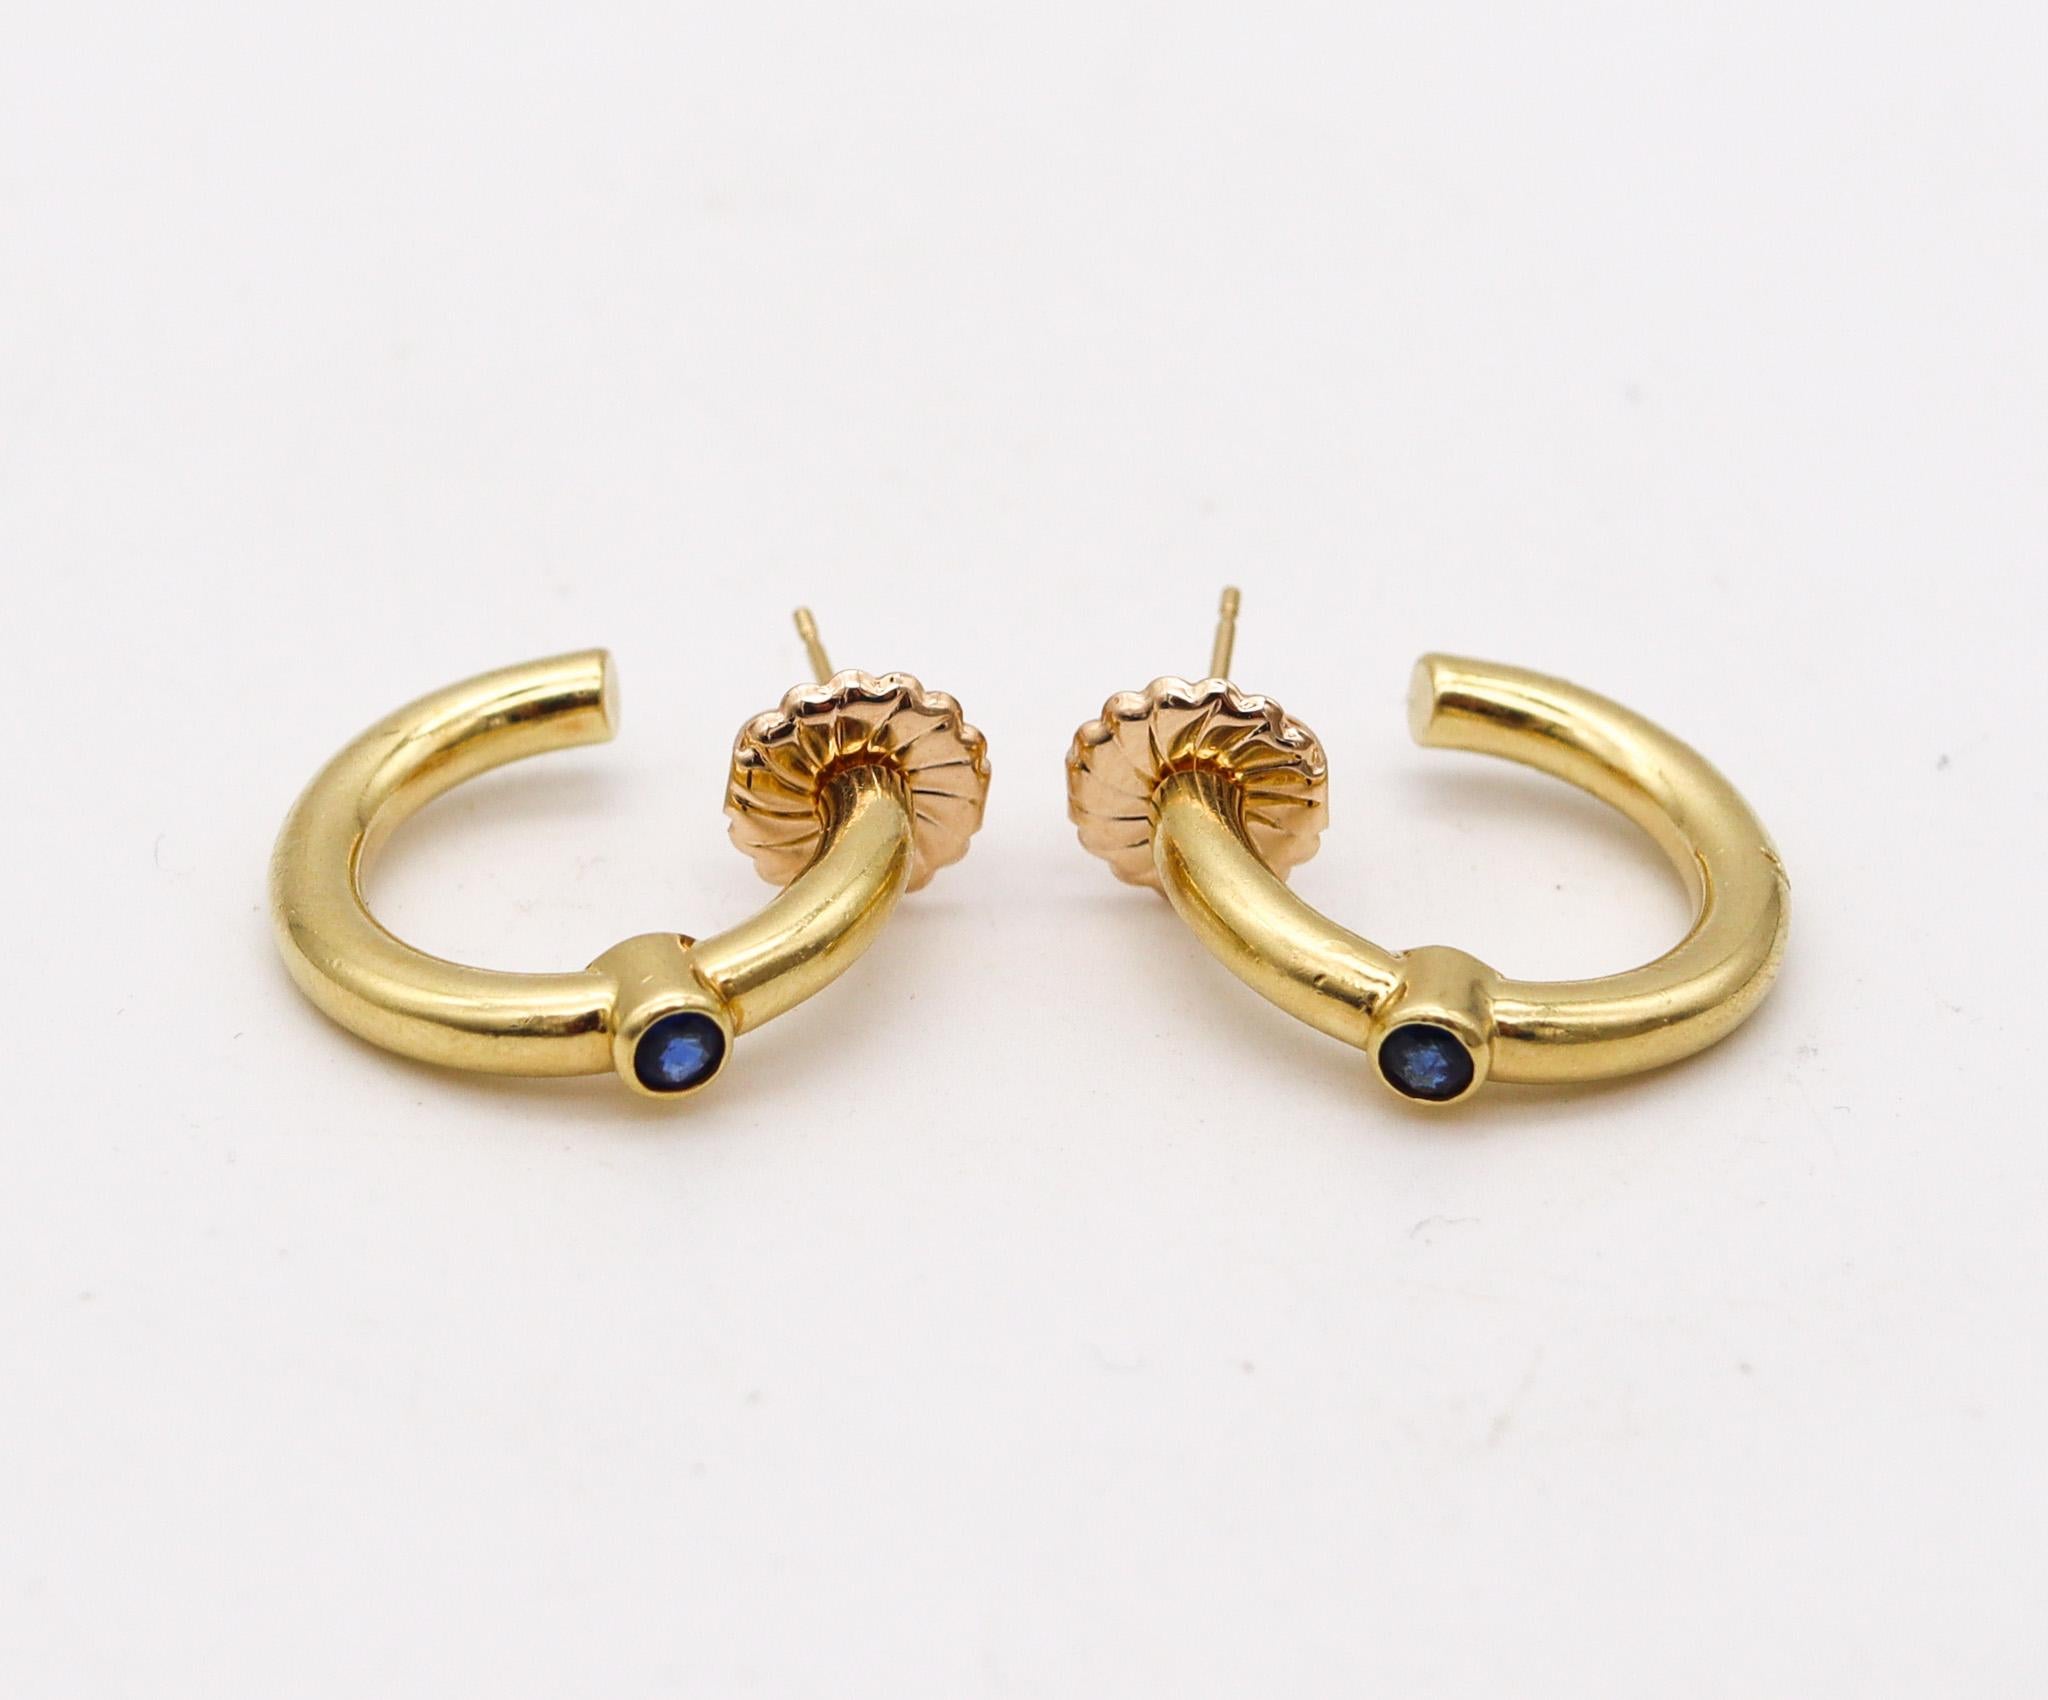 Hoops earrings designed by Reinstein-Ross.

Beautiful pair of hoops earrings, created in New York city by the exclusive jewelry designers of Reinstein-Ross. This pair has been crafted in solid yellow gold of 18 karats (.750/.999 Au) with a delicate